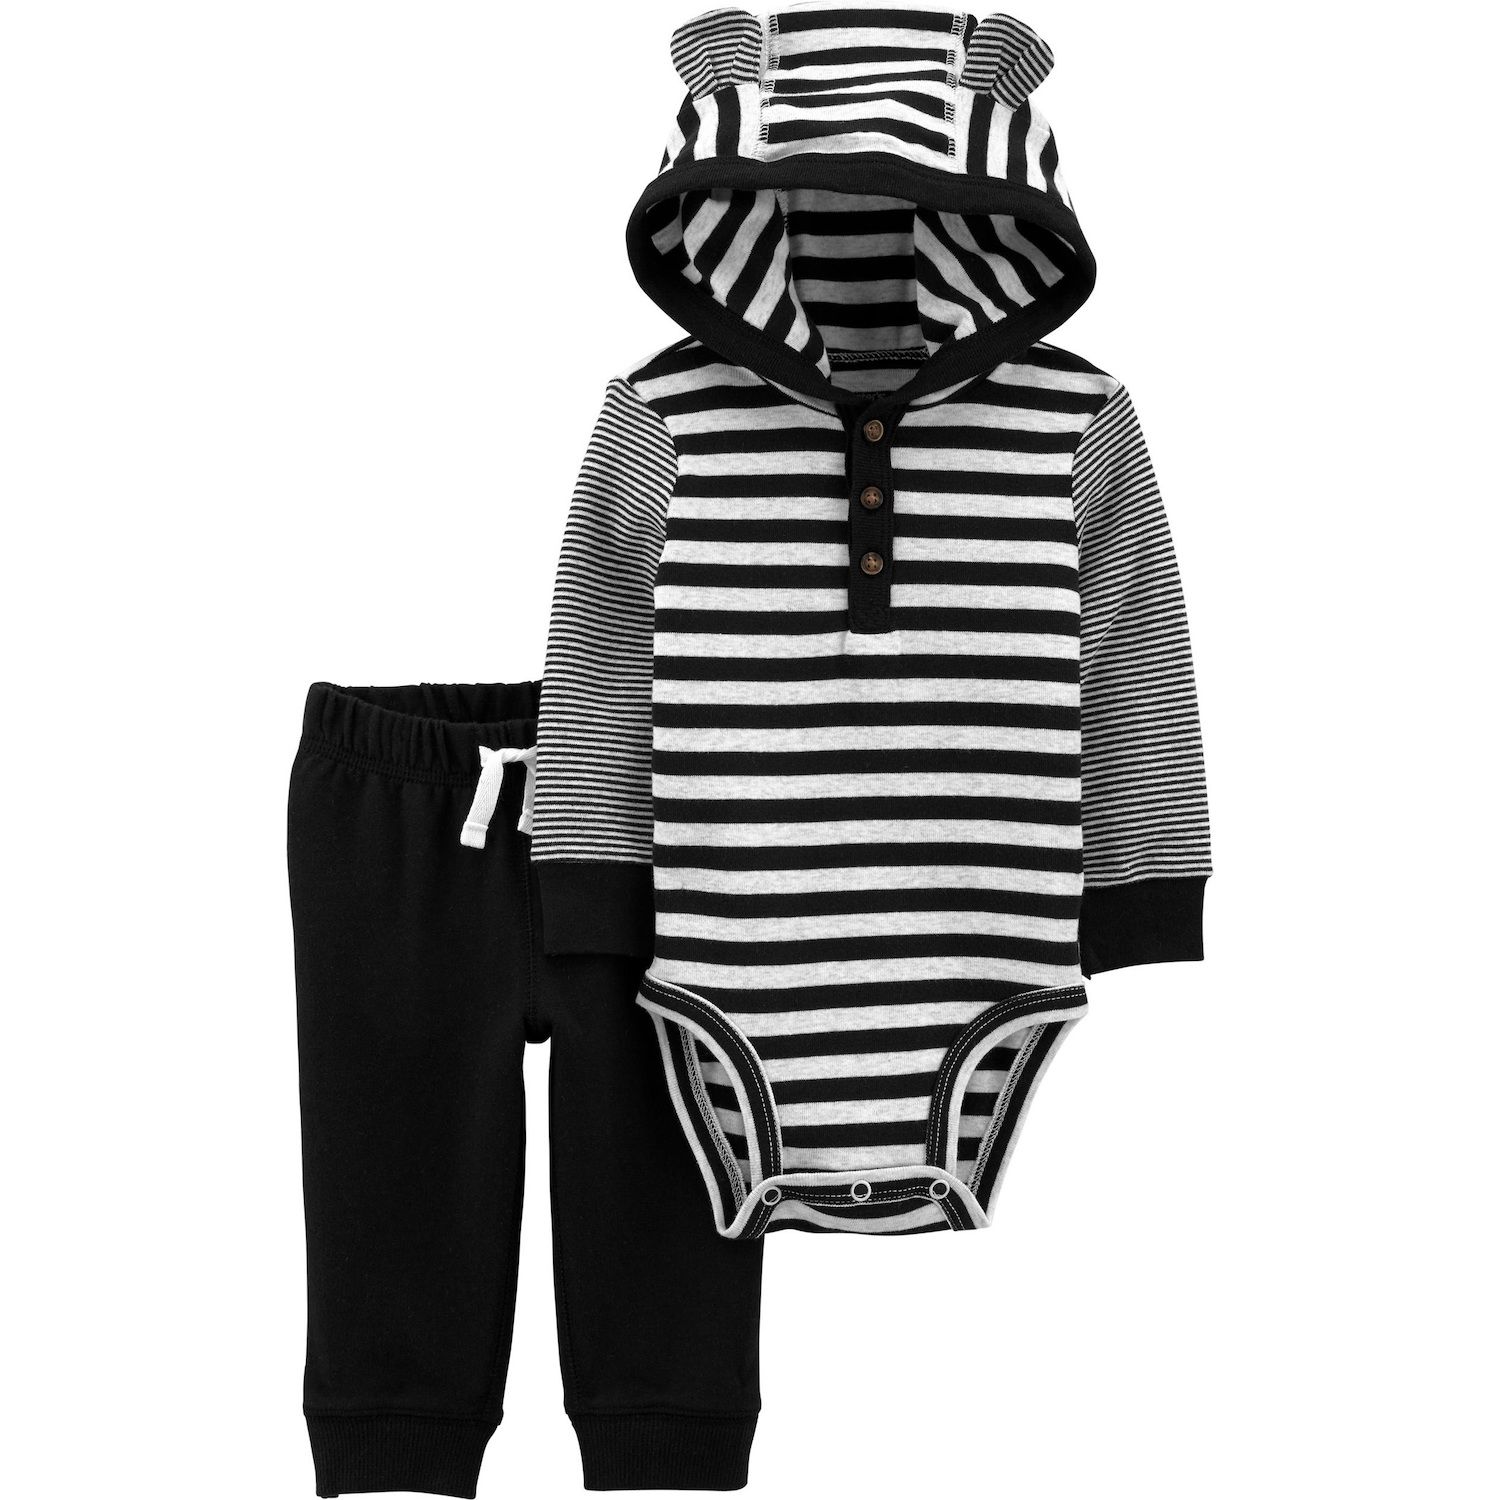 baby boy black and white outfit